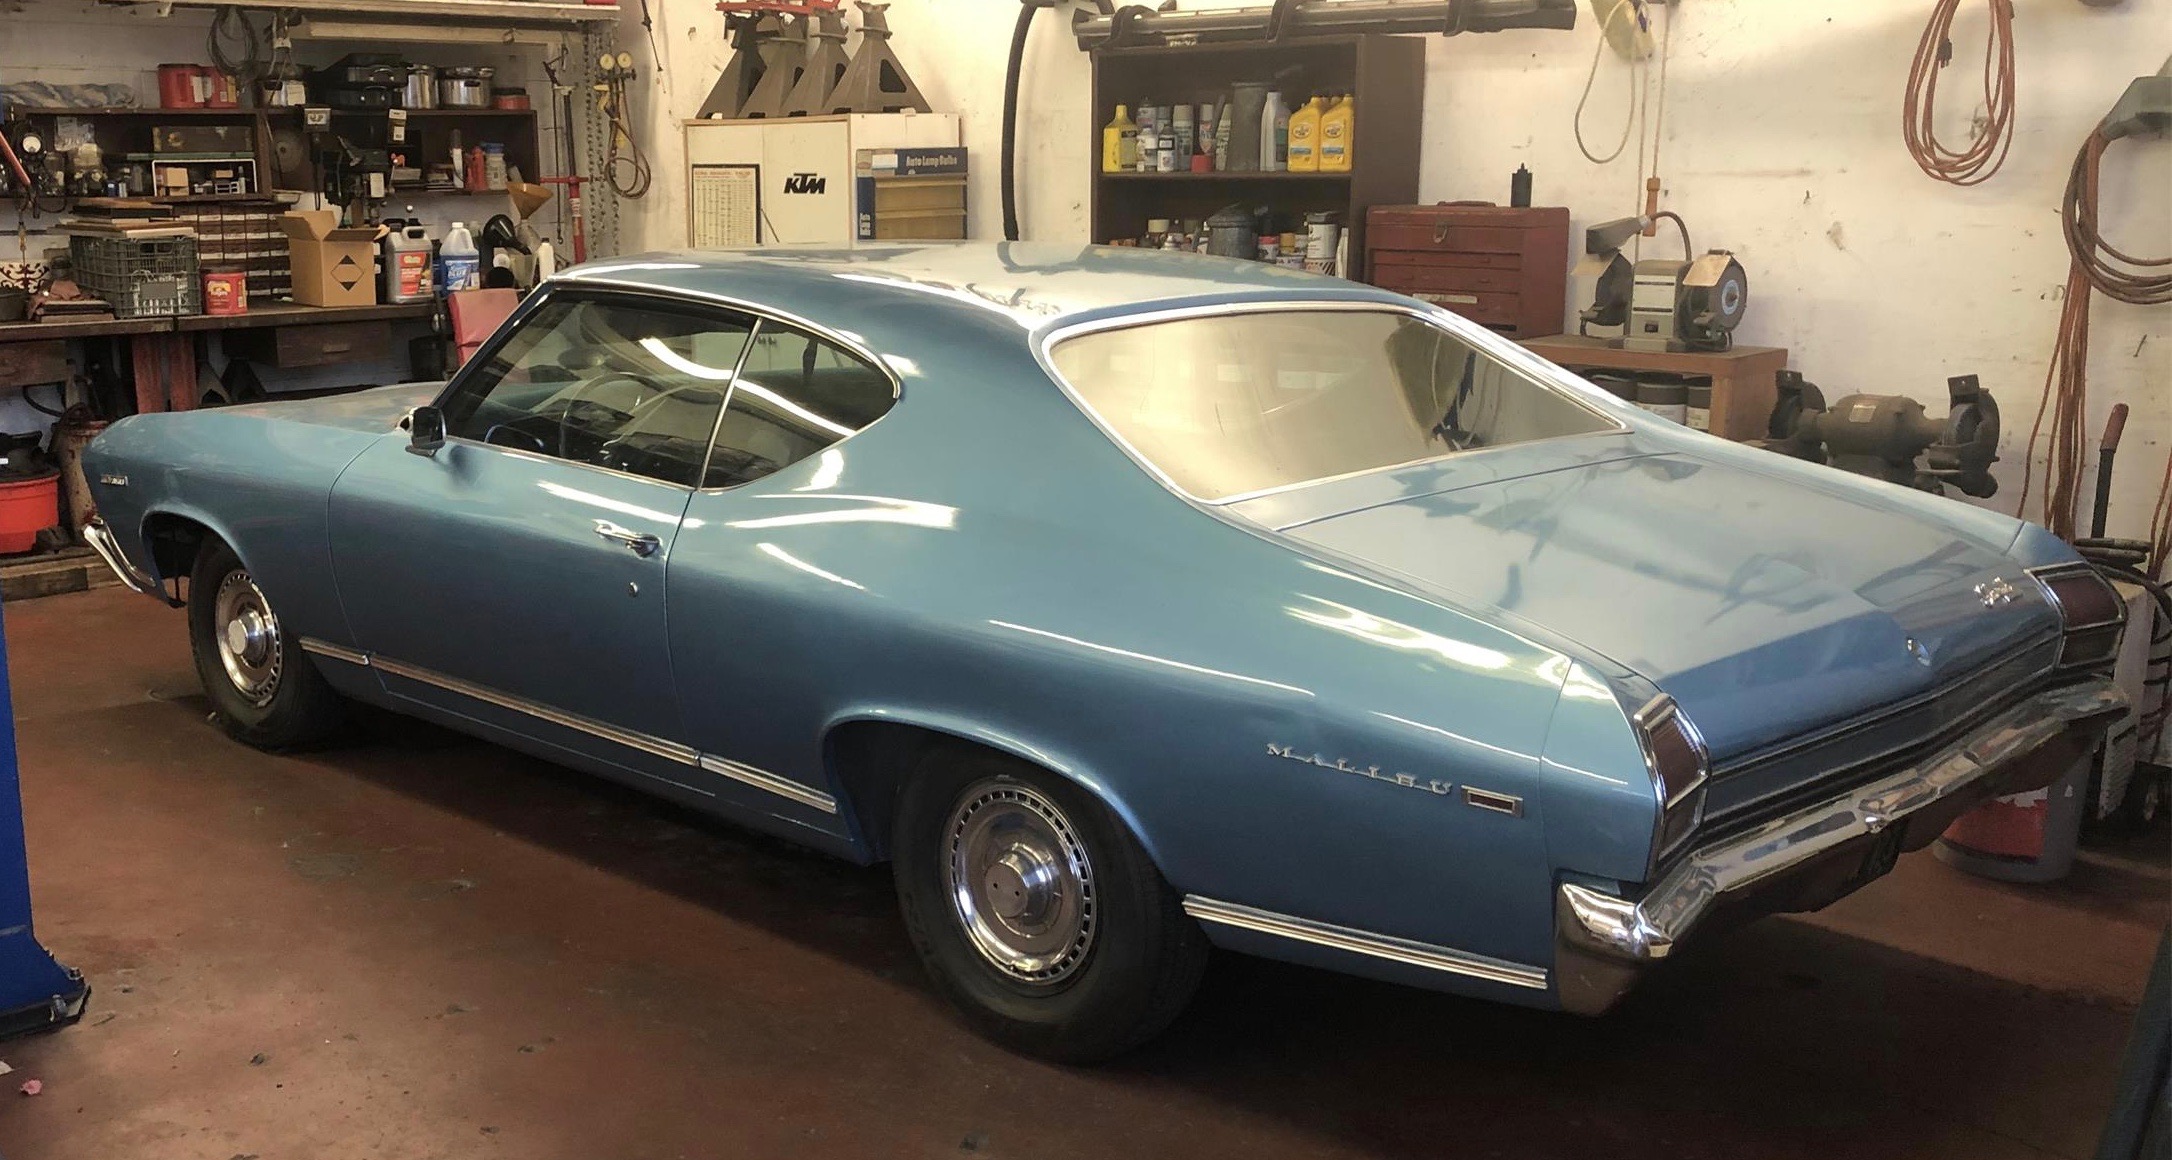 1969 Chevrolet Chevelle, This ‘little old lady’ left ’69 Chevelle Malibu to its caretaker, ClassicCars.com Journal